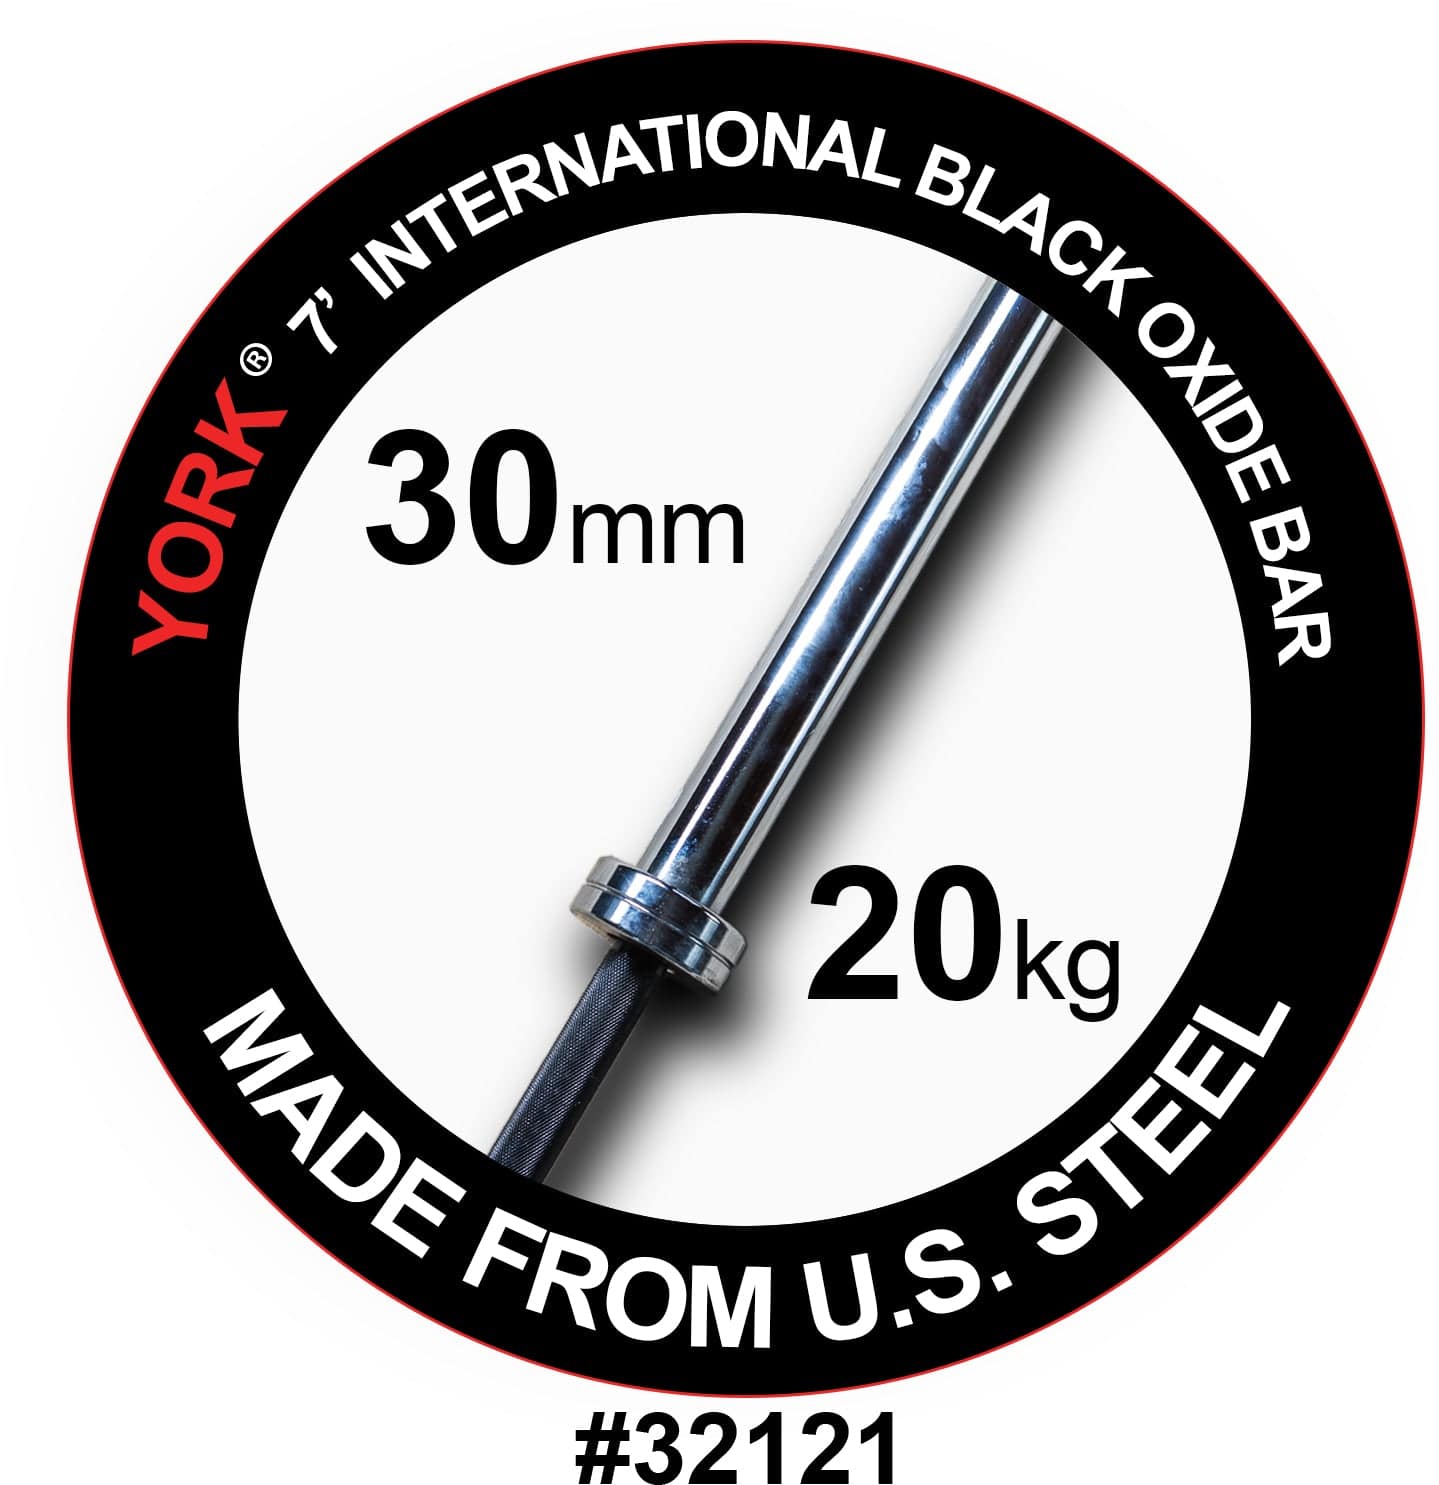 York Barbell | International Black Oxide Bar - 7ft (30mm) - XTC Fitness - Exercise Equipment Superstore - Canada - Multi-Purpose Barbell